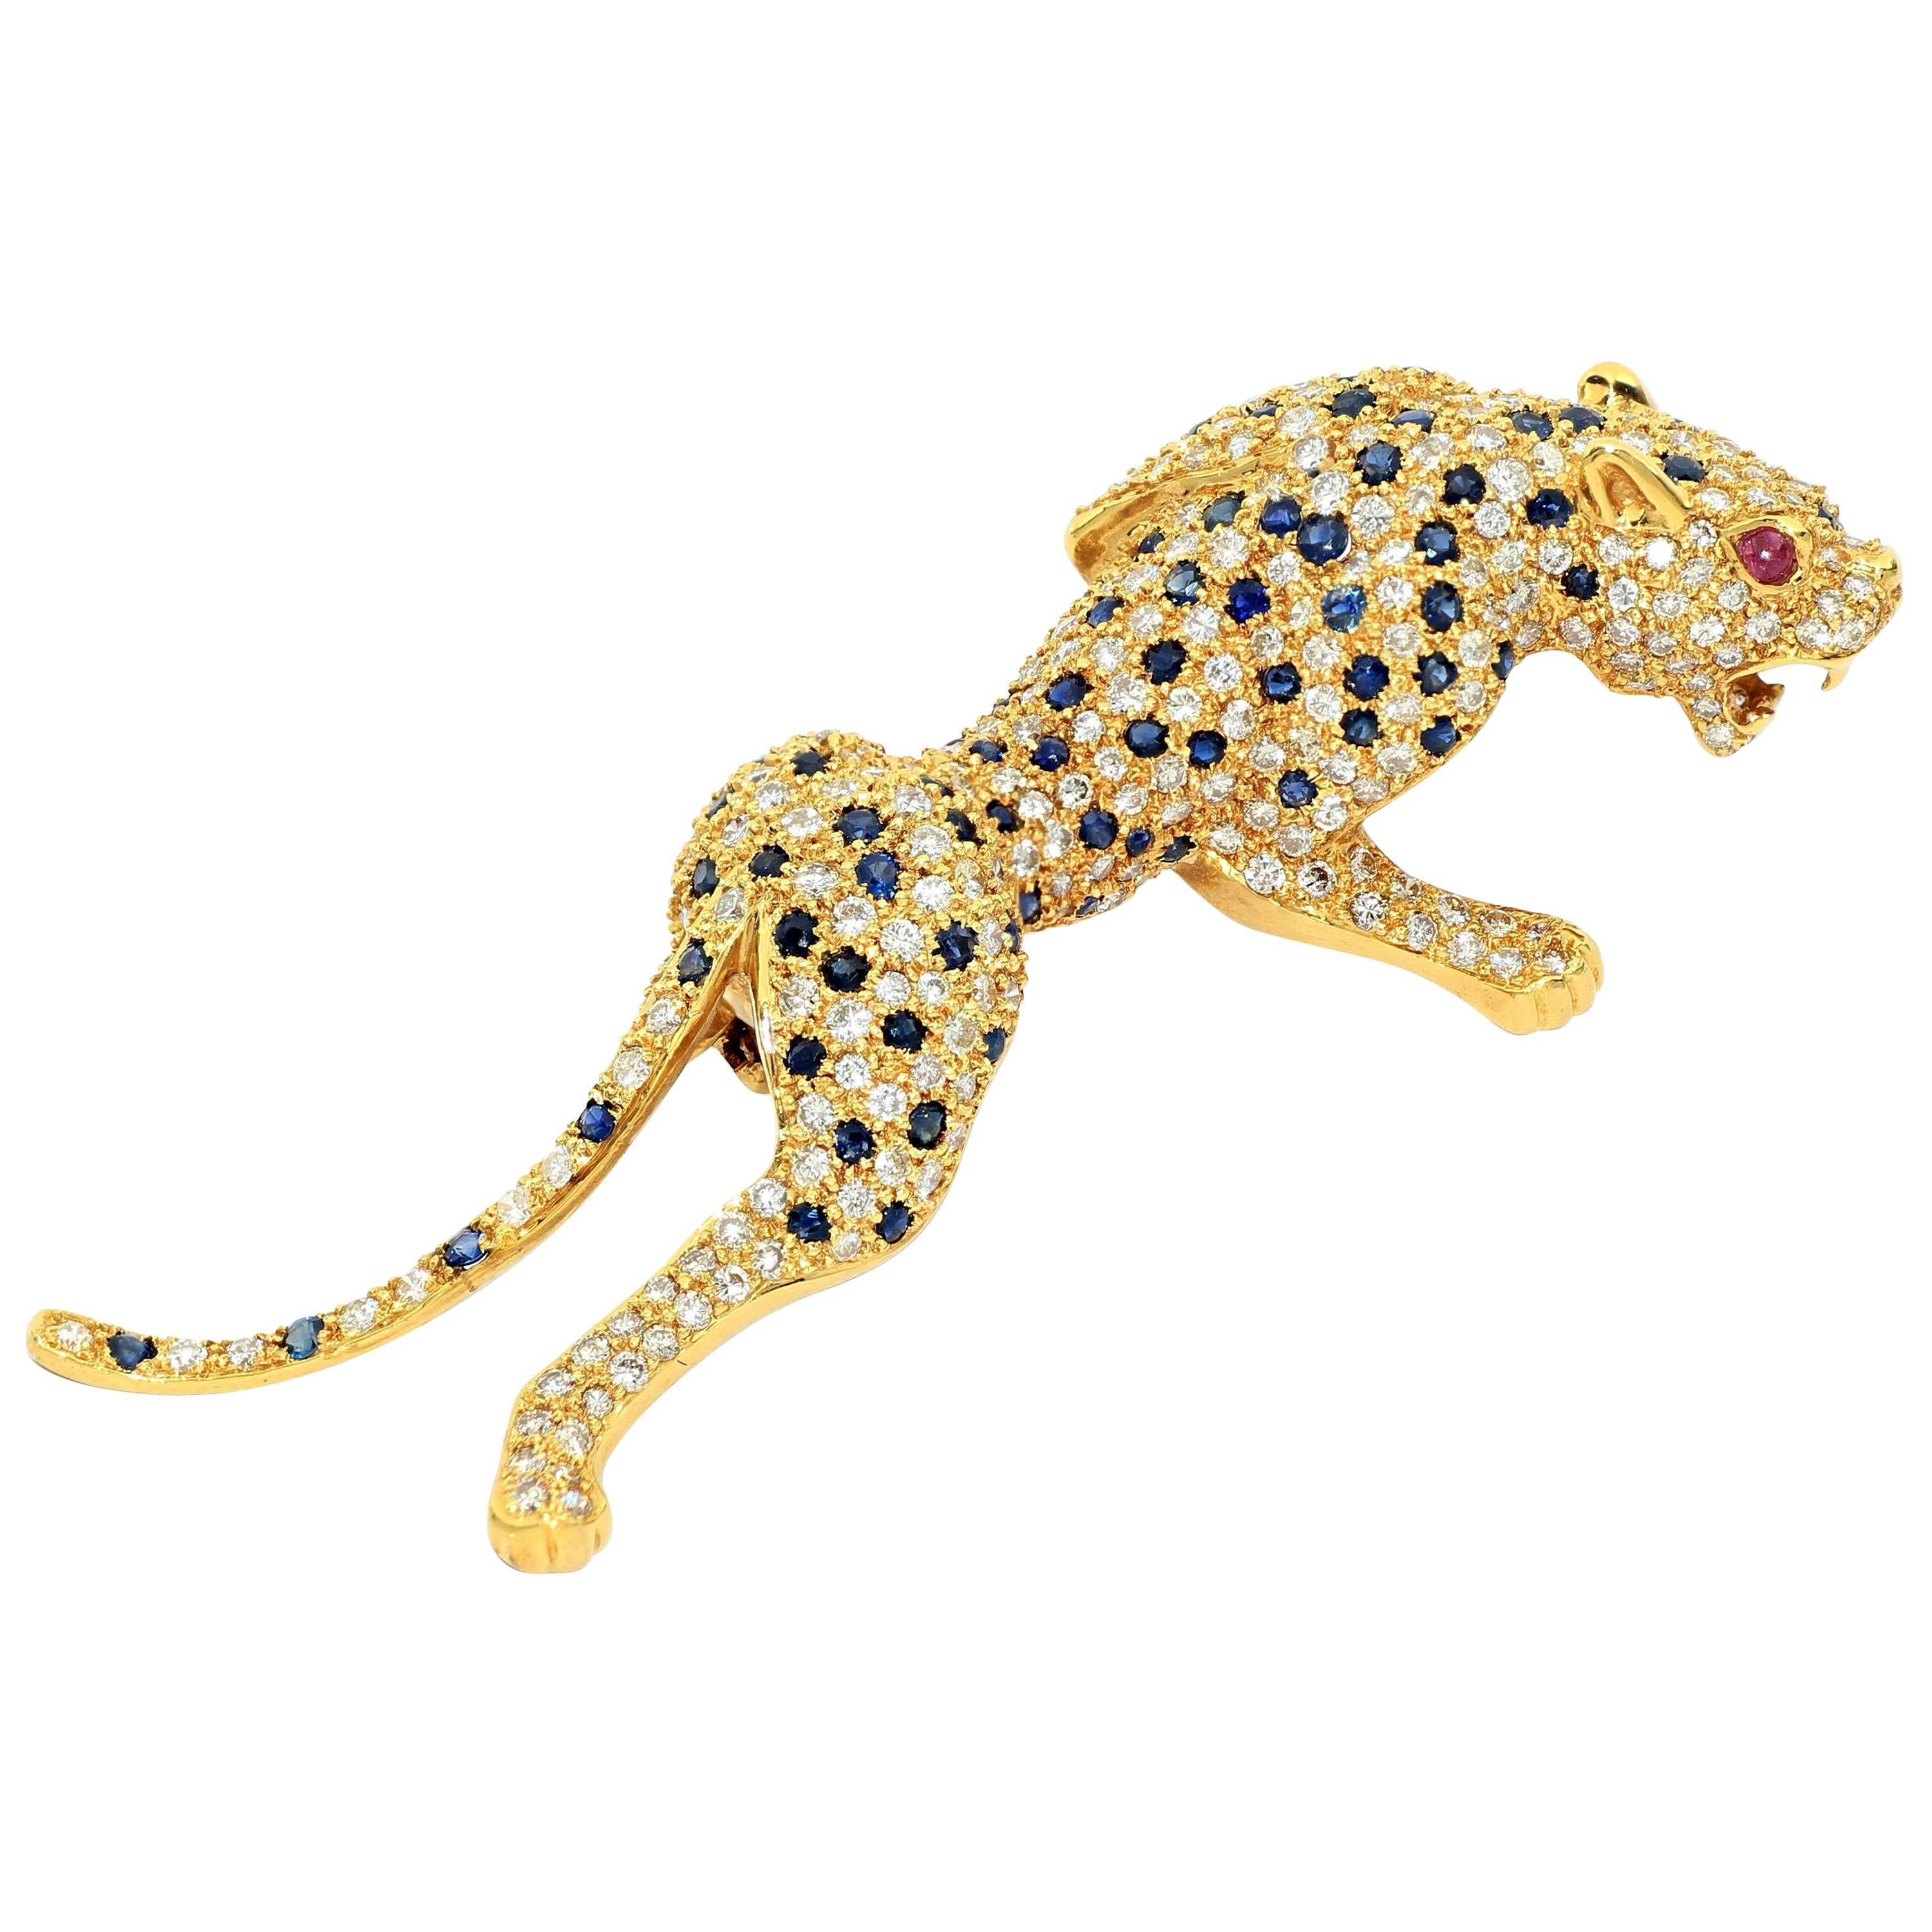 18K Gold Diamond Panther Brooch with Sapphires and Rubies 